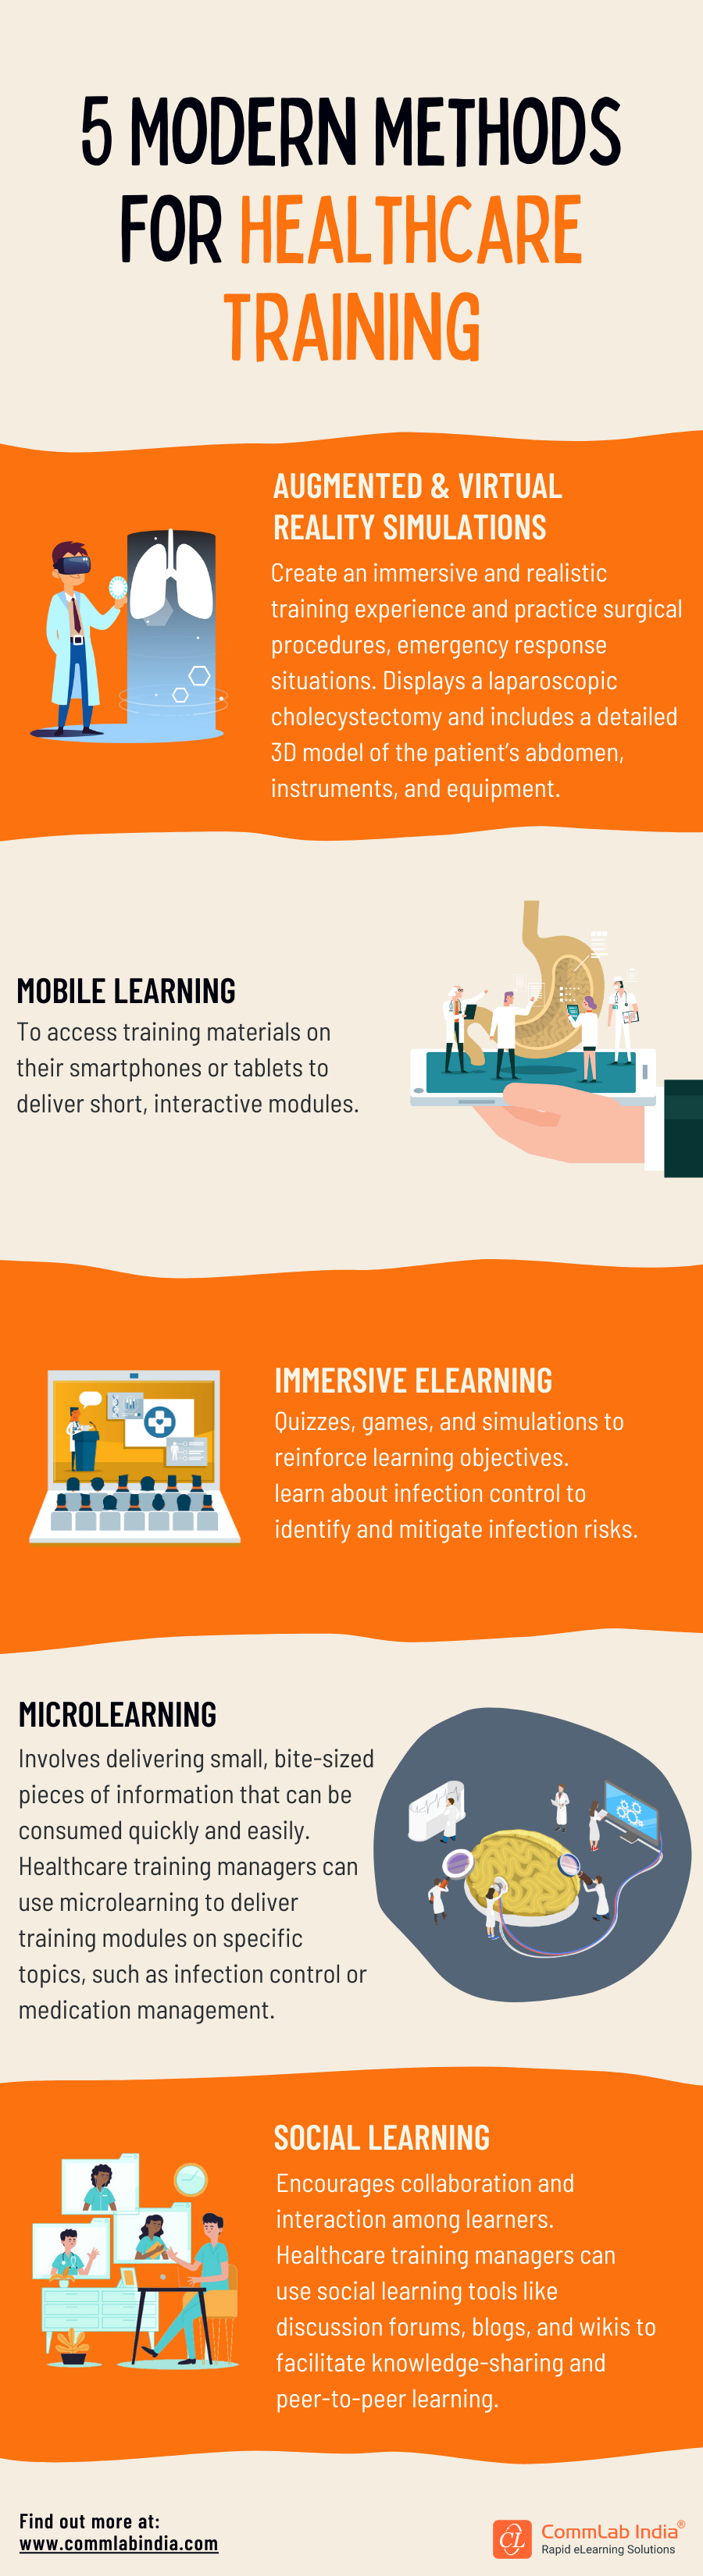 Digital Learning: For Successful Healthcare Training [Infographic]